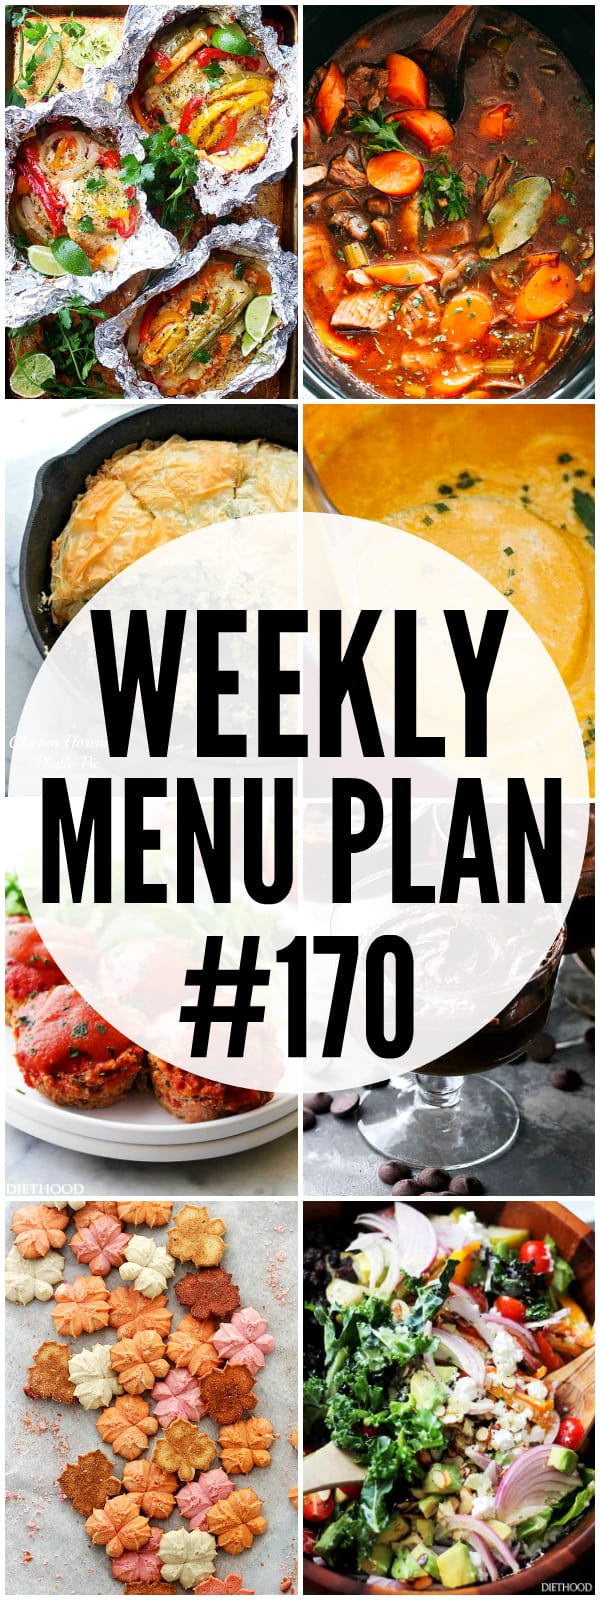 WEEKLY MENU PLAN (#170) - A delicious collection of dinner, side dish and dessert recipes to help you plan your weekly menu and make life easier for you!